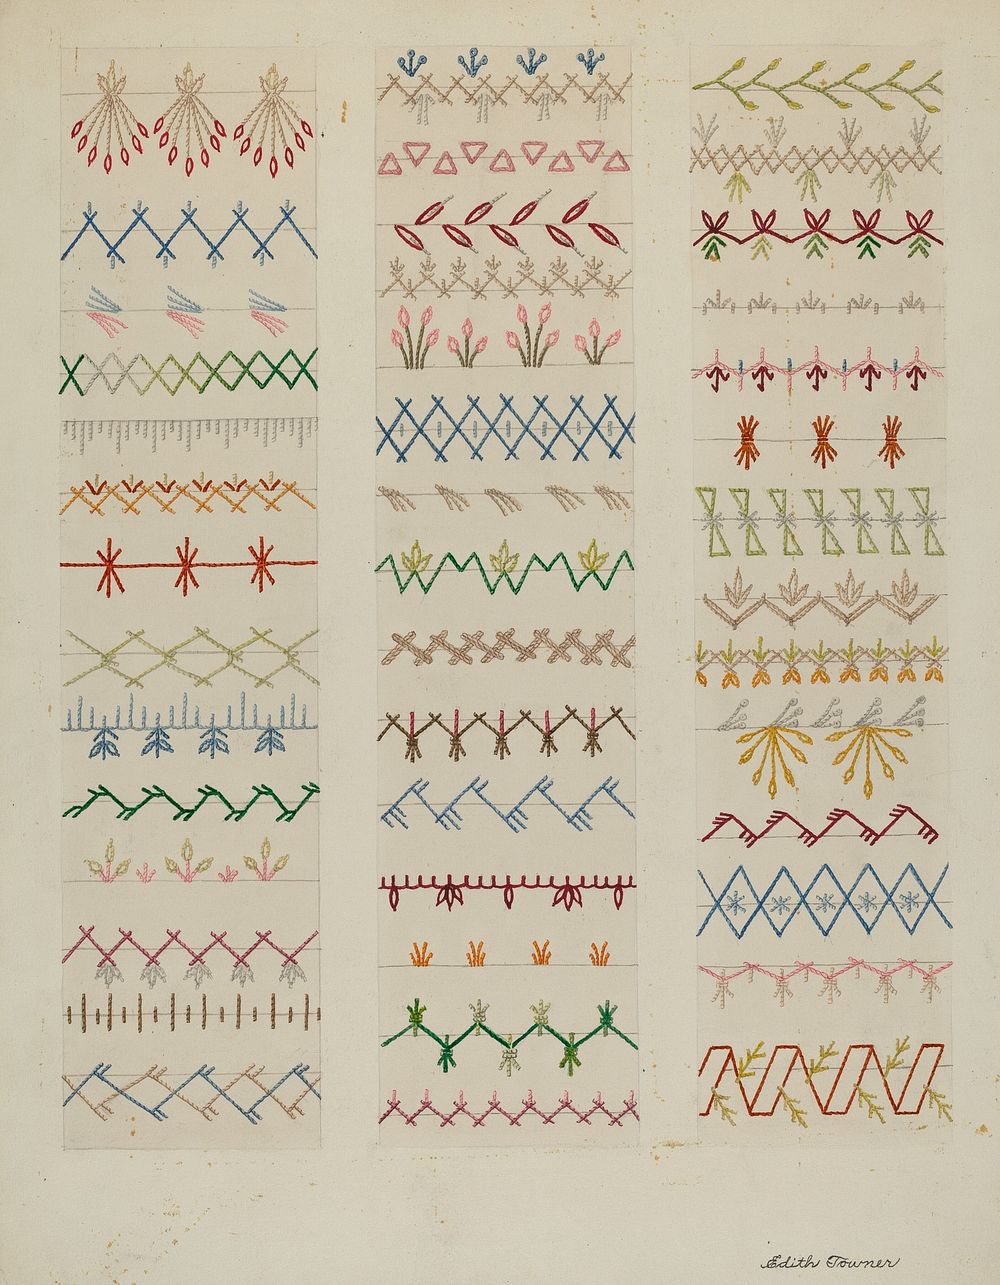 Sampler, (c. 1937) by Edith Towner.  